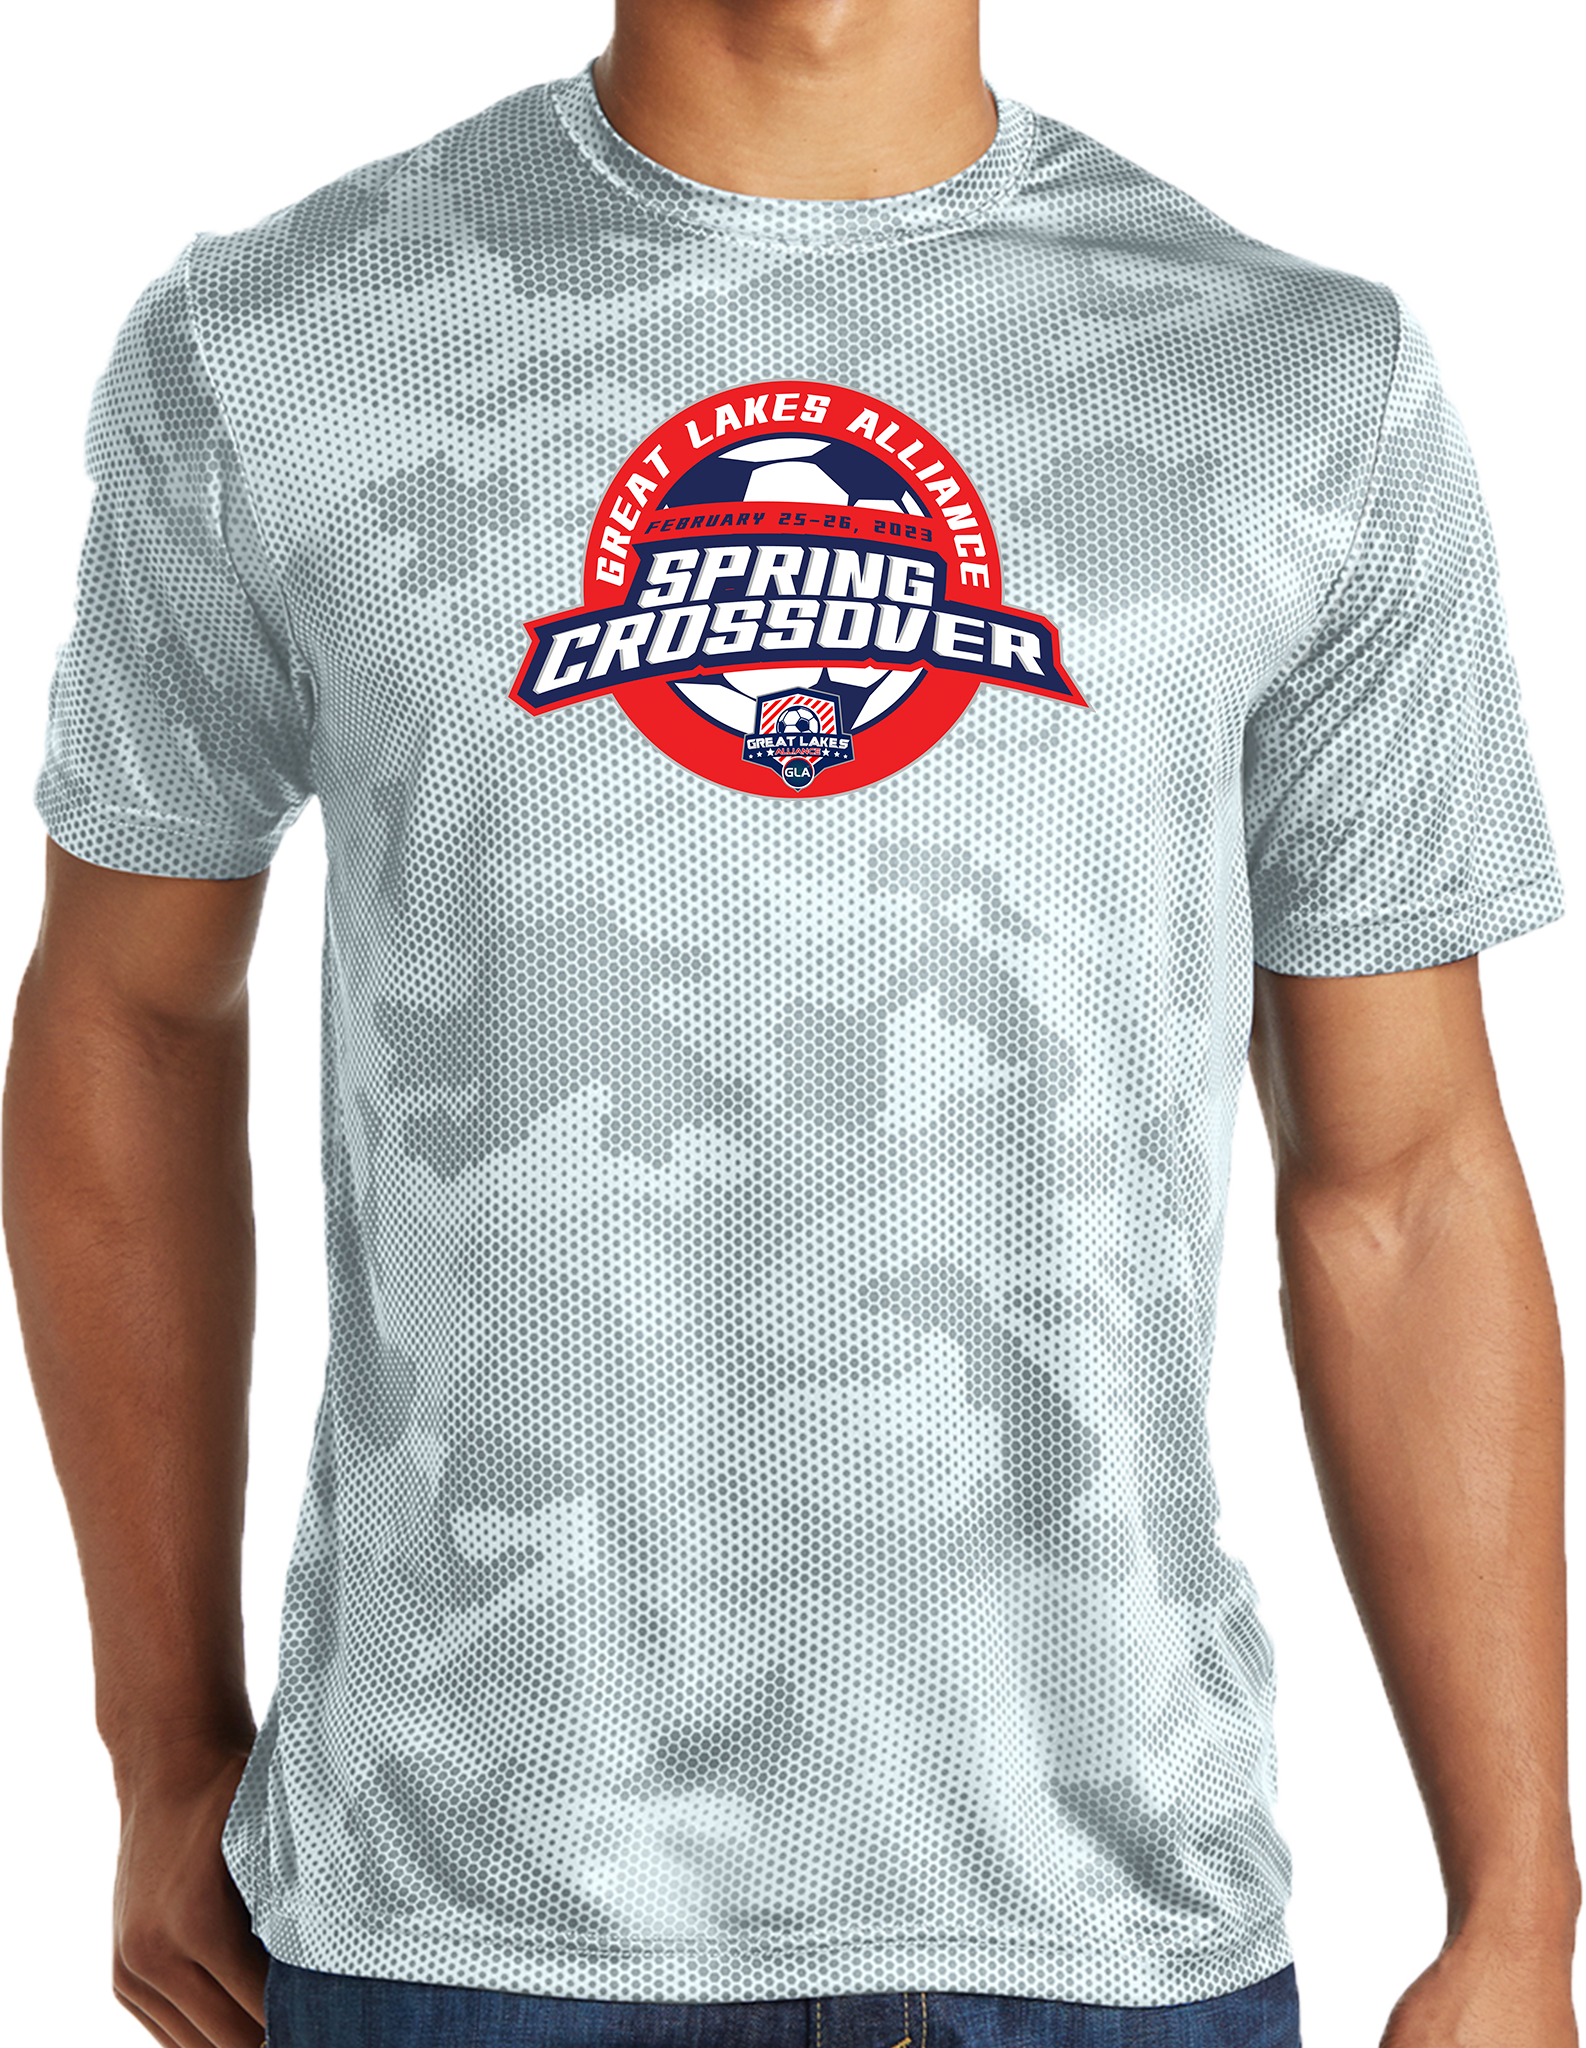 PERFORMANCE SHIRTS - 2023 Great Lakes Alliance Spring Crossover